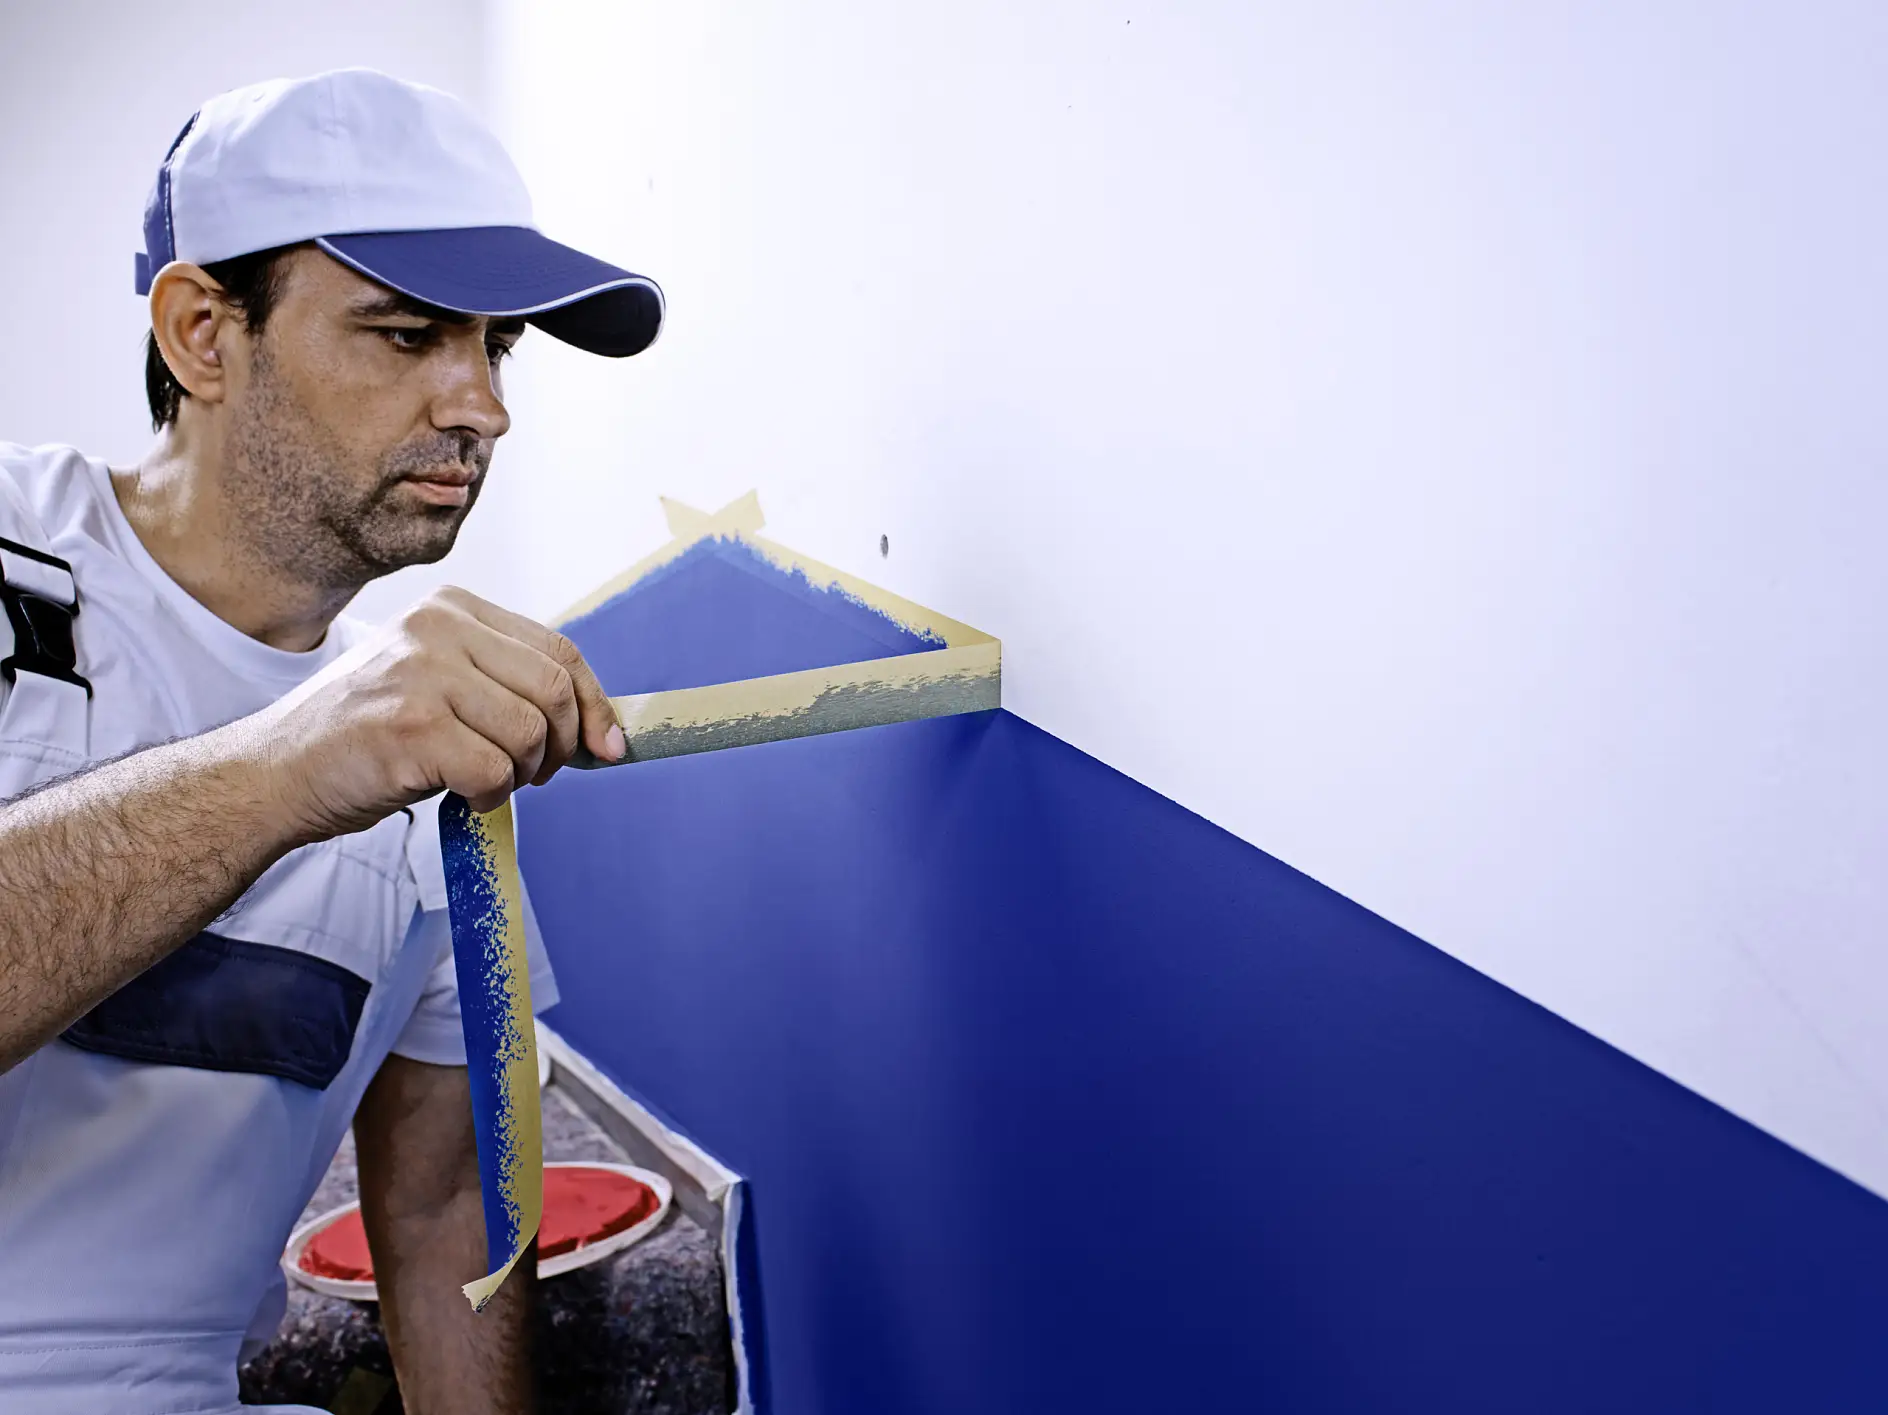 Experience our product range for professional users like painters, plumbers, or professional carton sealing companies.